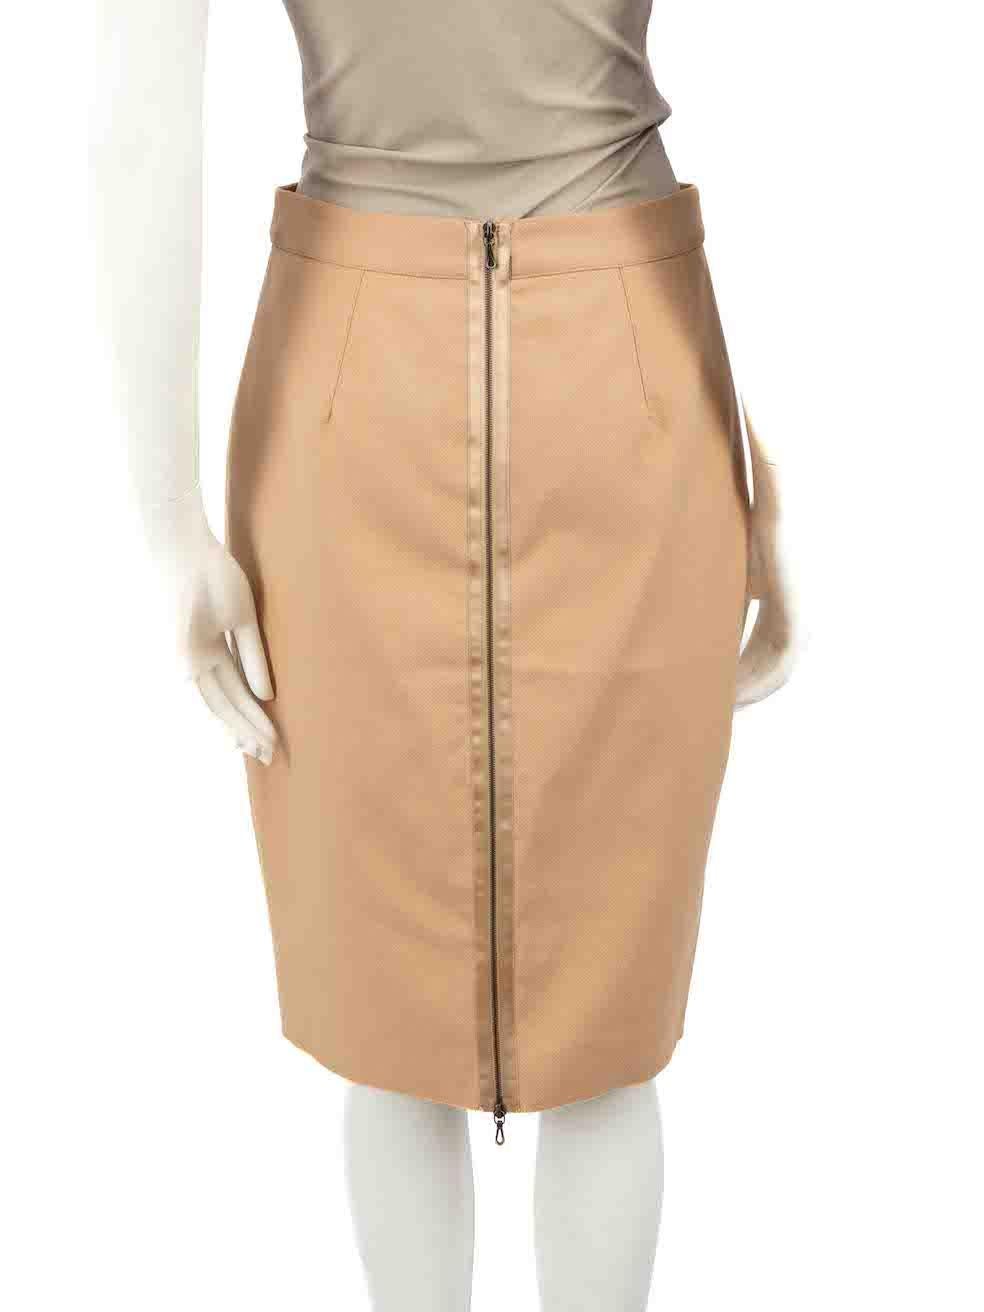 Lanvin Beige Raw Edge Pencil Skirt Size M In Good Condition For Sale In London, GB